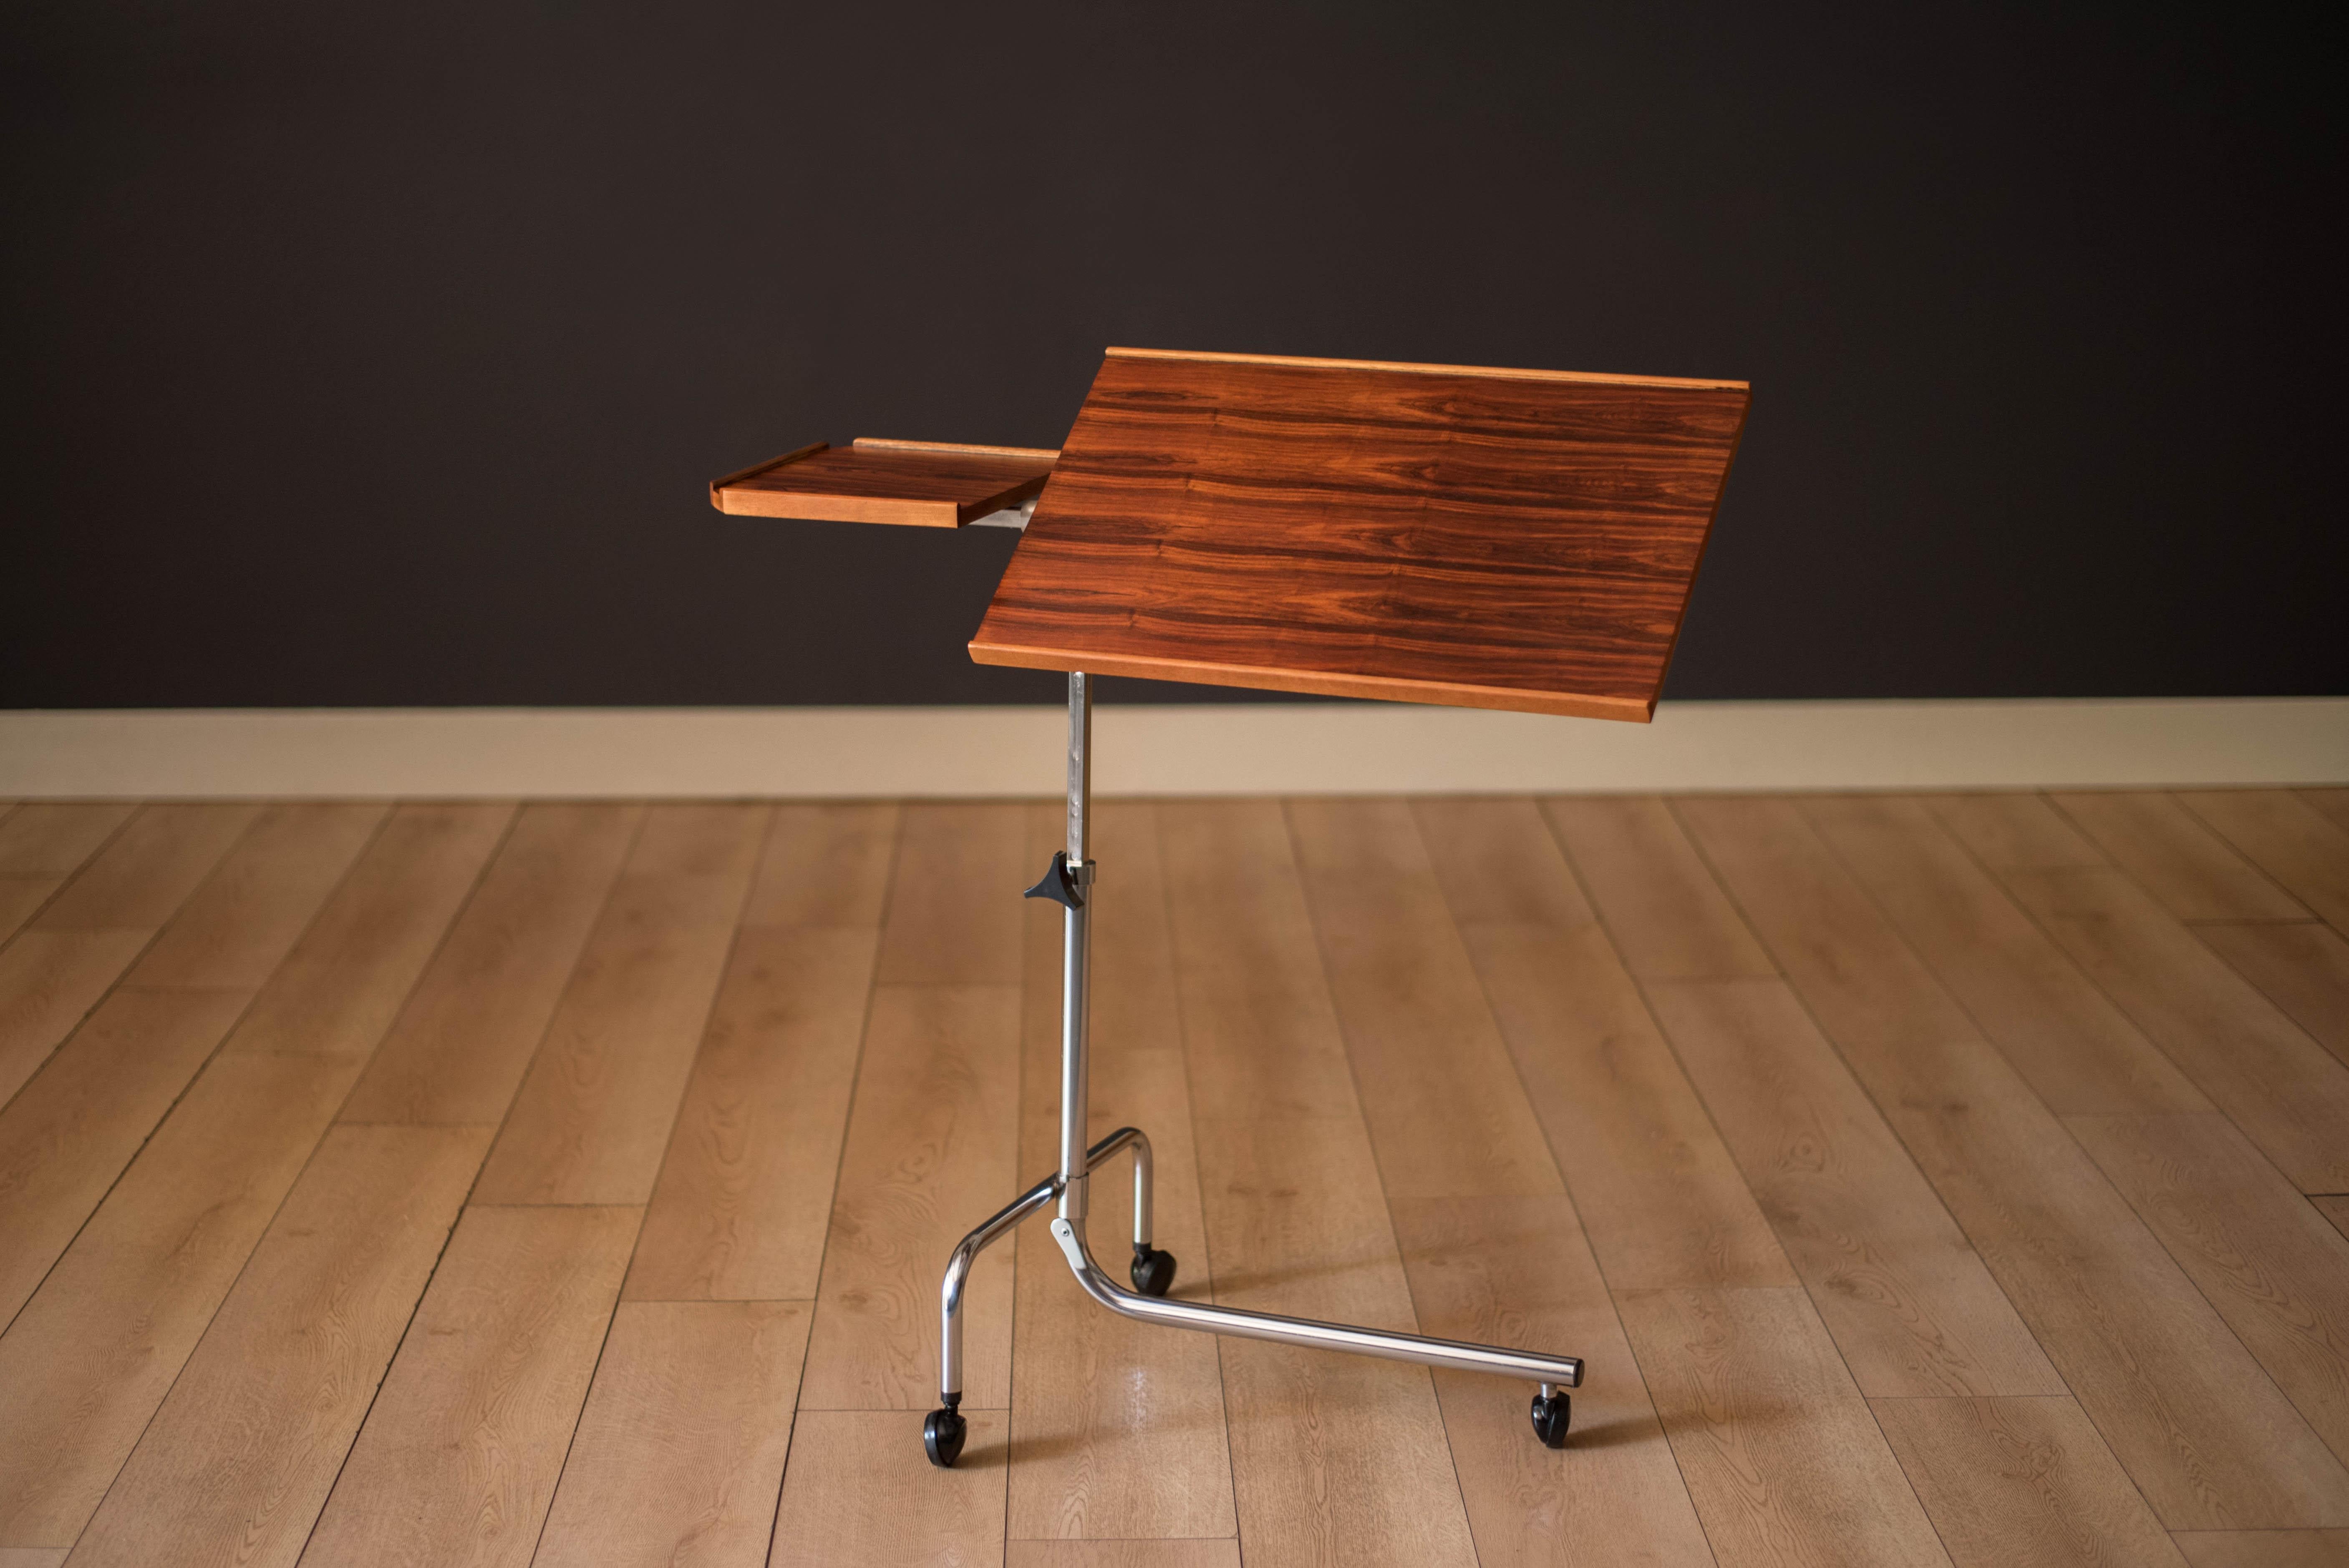 Mid-Century Modern ergonomic bedside reading stand in rosewood and chrome manufactured by H.M.N., Denmark circa 1970s. Features a tilting tray and a small fixed table designed with sculptural raised edges to catch pens or small accessories. The